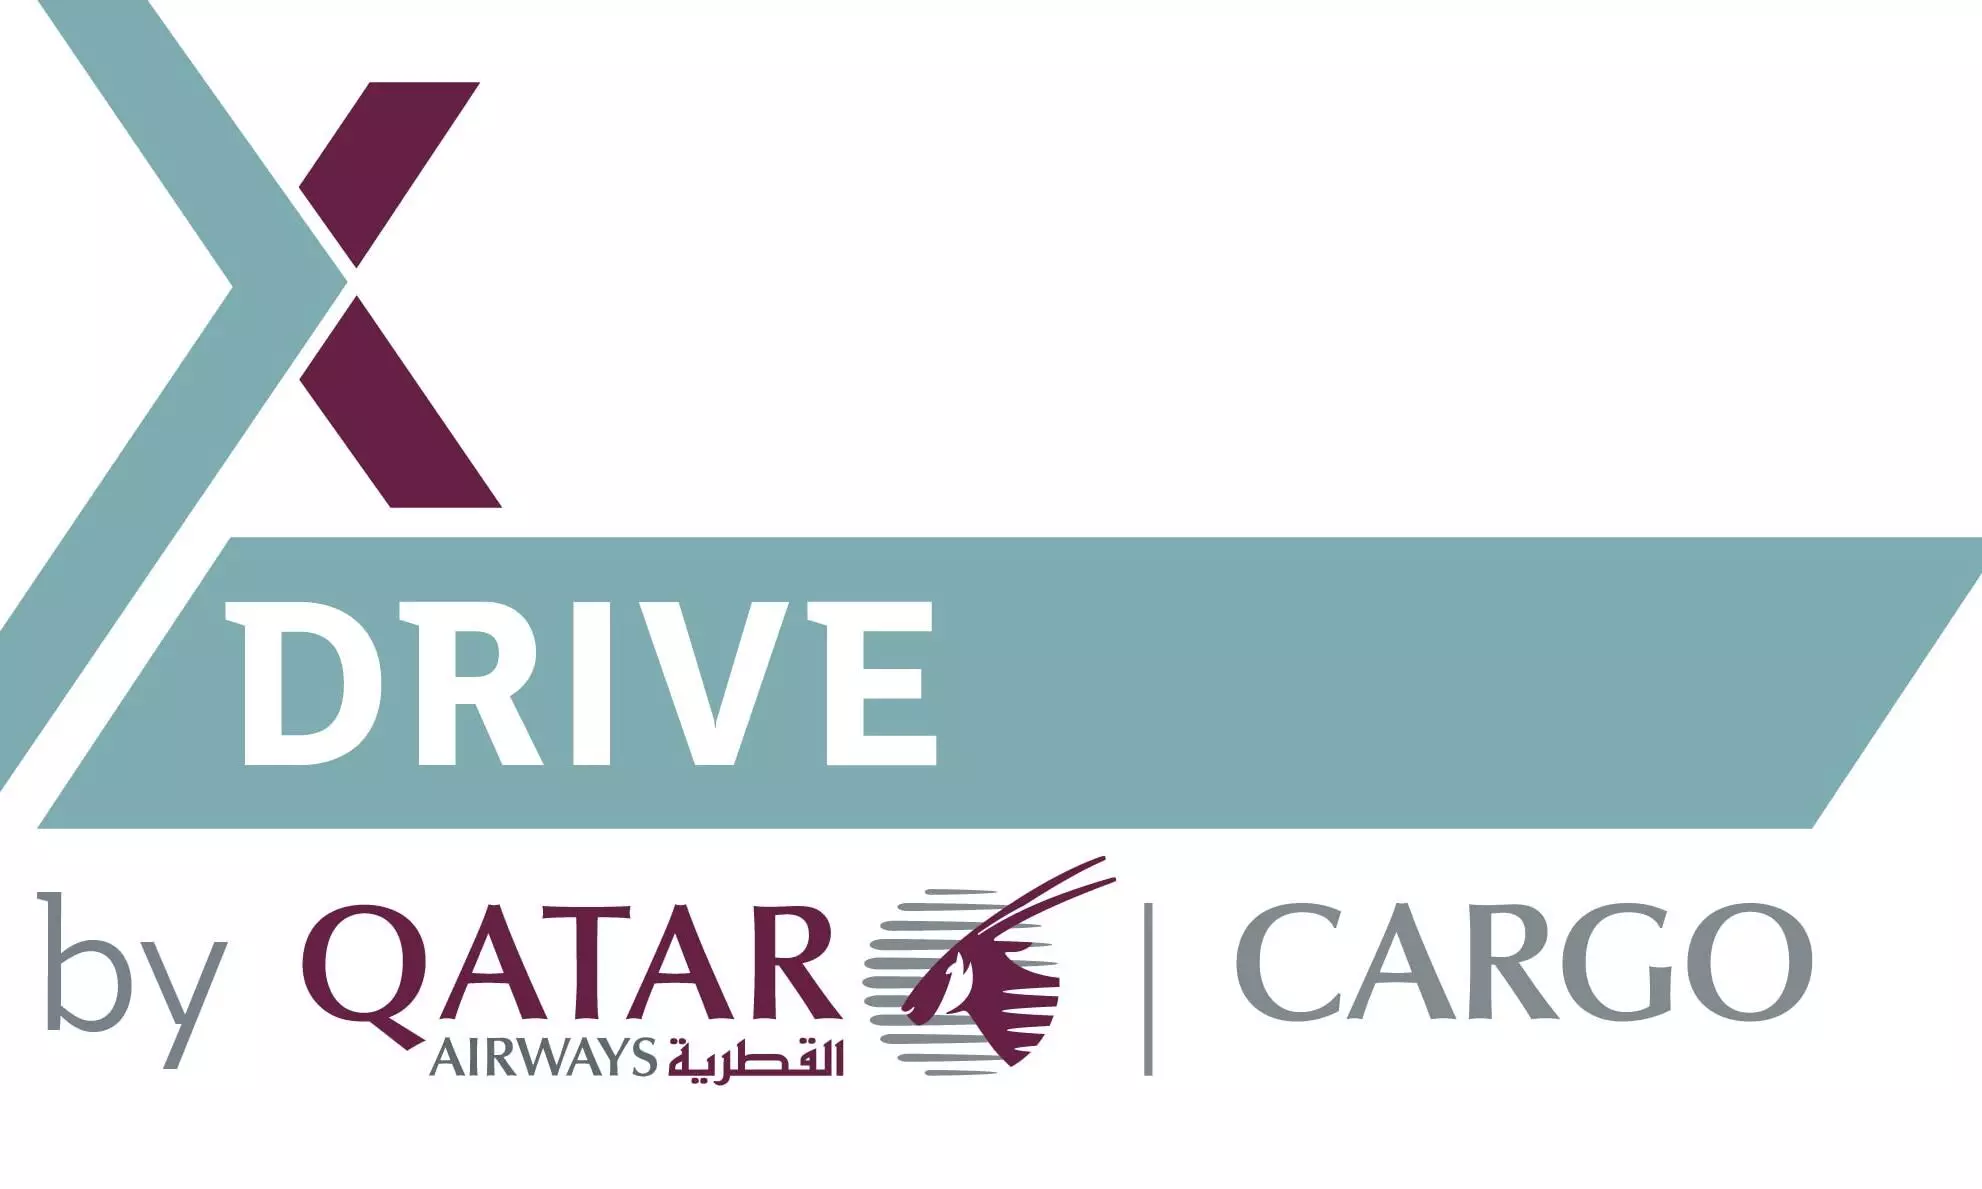 Qatar Airways Cargo launches latest product Drive